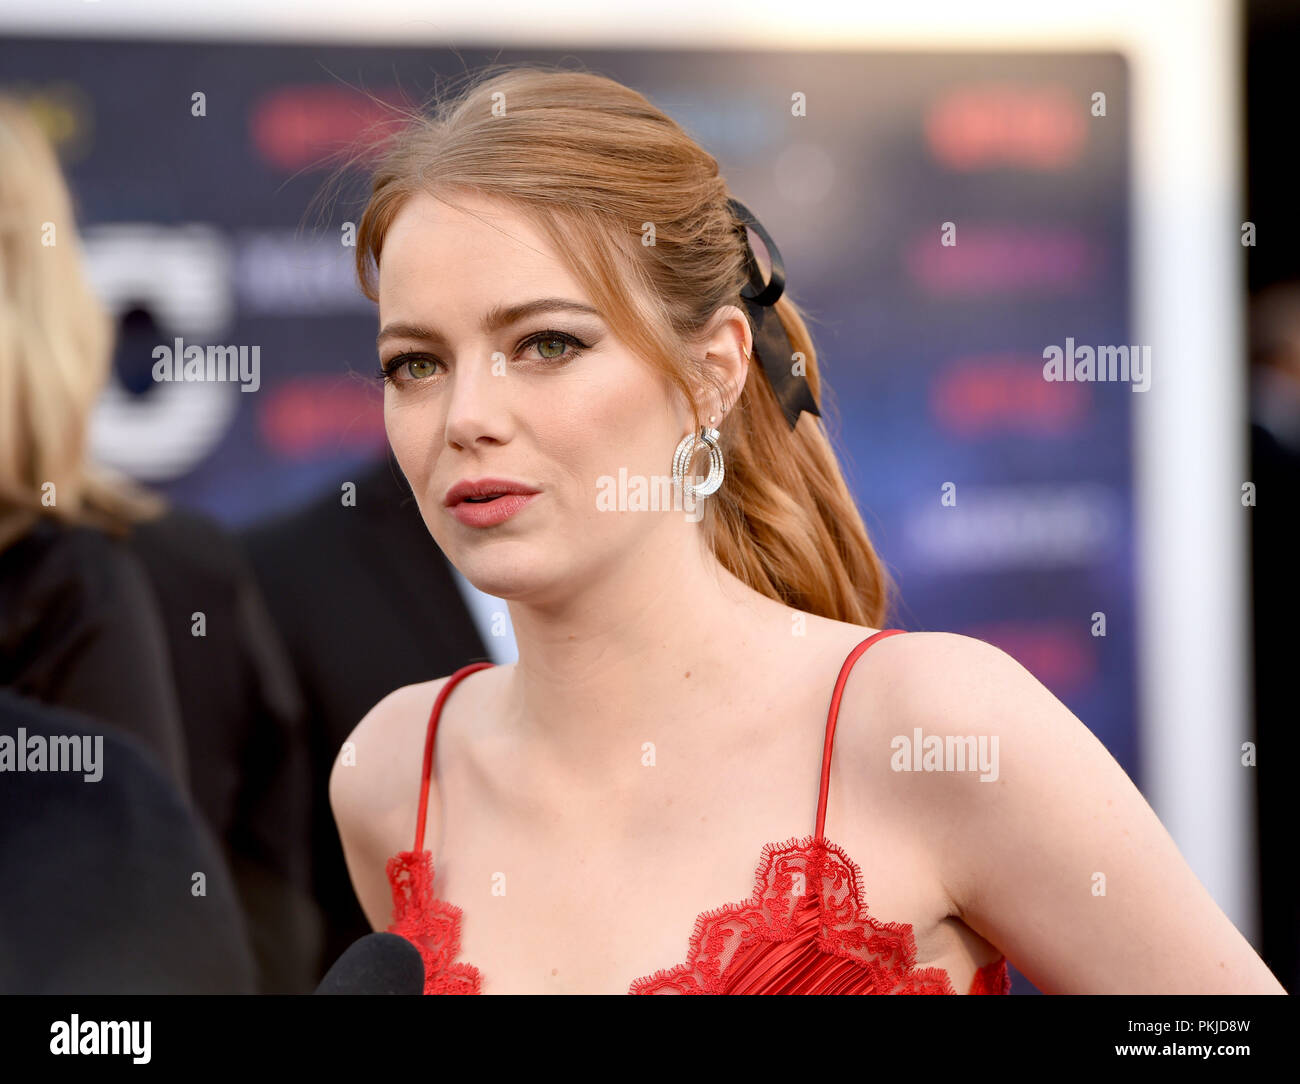 Photo Must Be Credited ©Alpha Press 079965 13/09/2018 Emma Stone at the Maniac World TV Premiere held at the Southbank Centre in London Stock Photo